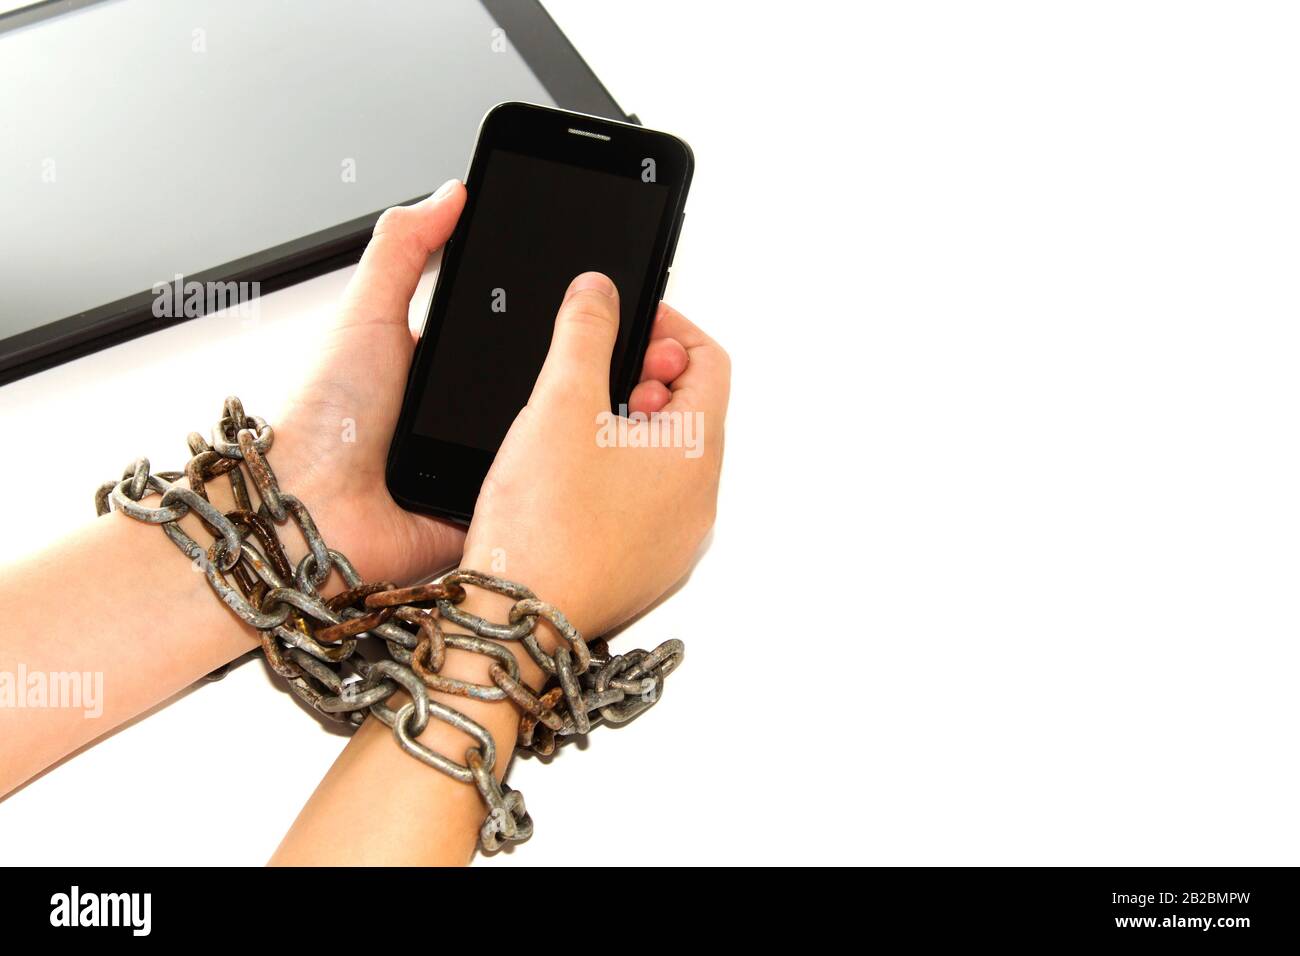 Iron chain ties together hands and smartphone - mobile phone addiction concept Stock Photo